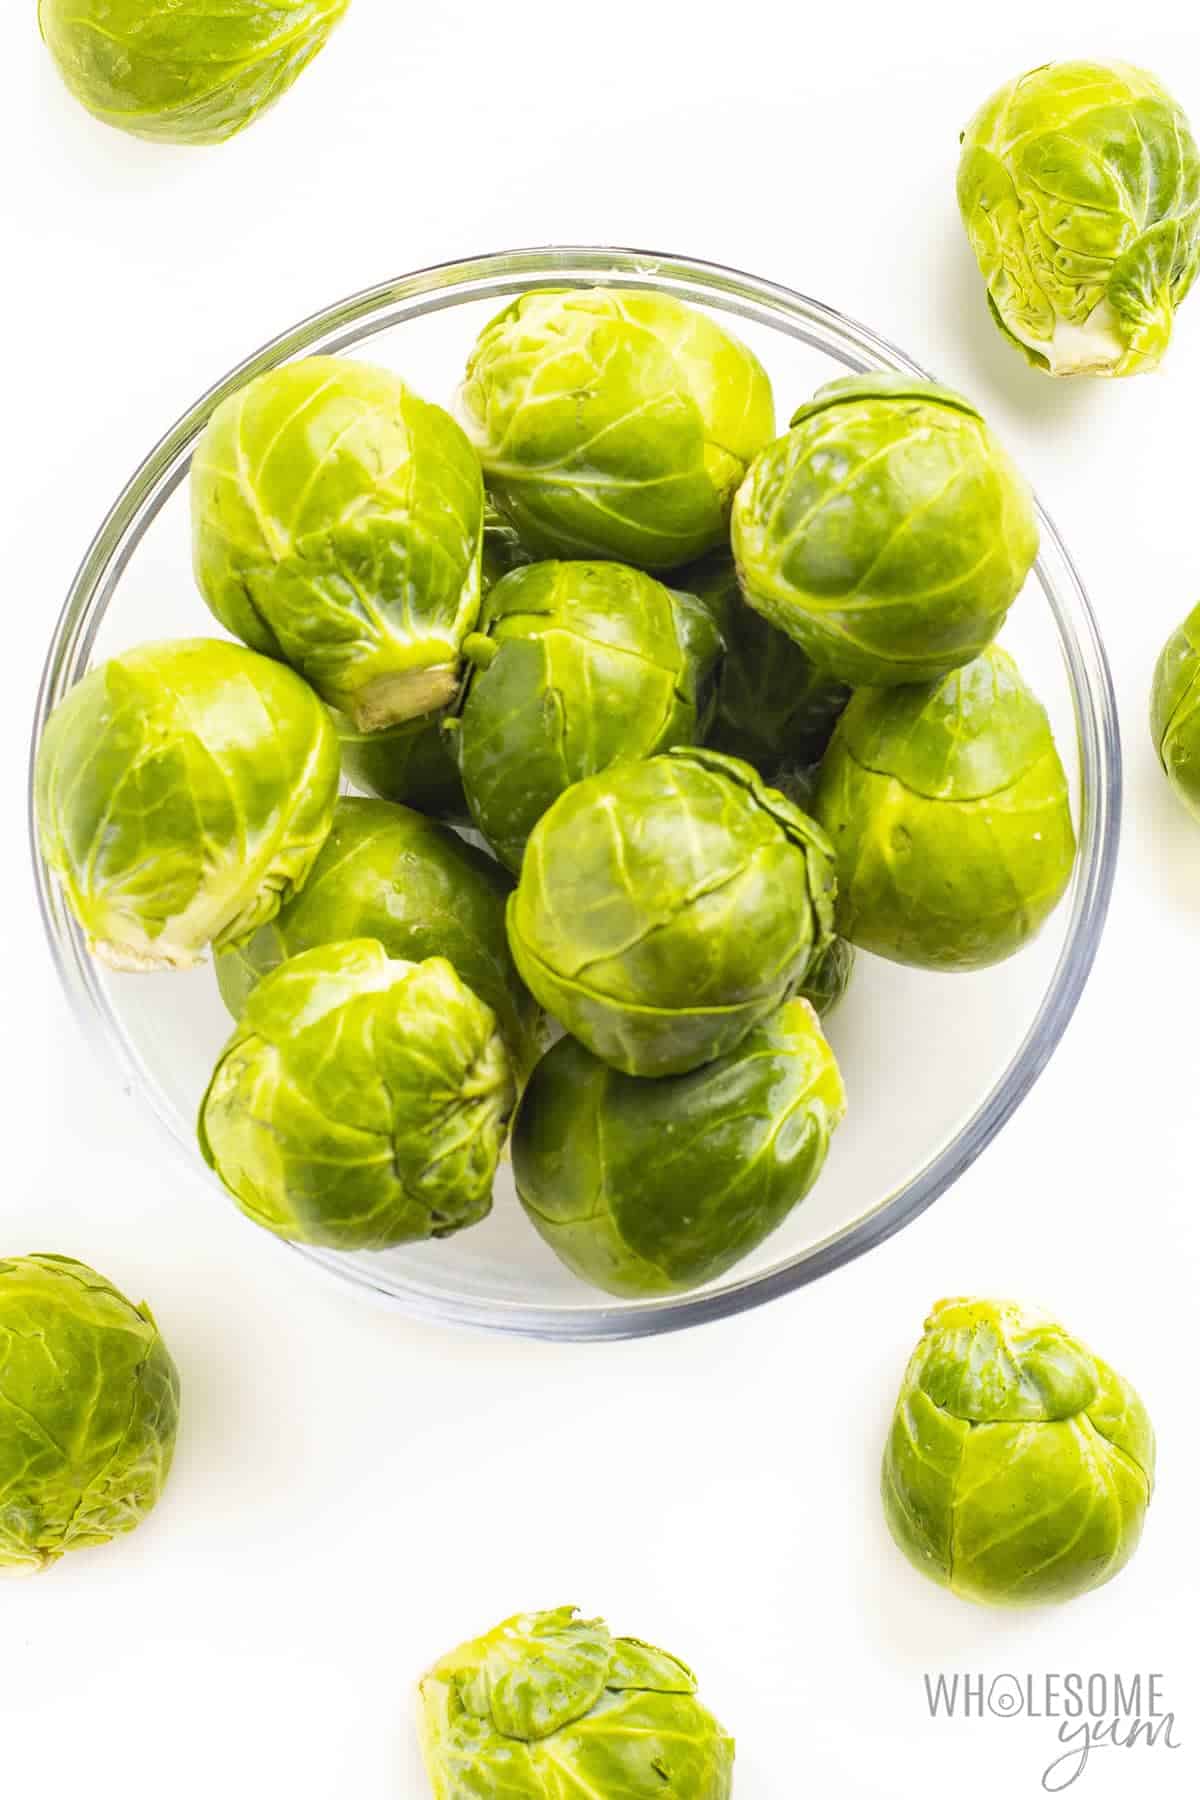 Are there high carbs in brussel sprouts? These raw brussels sprouts are naturally low in carbs.